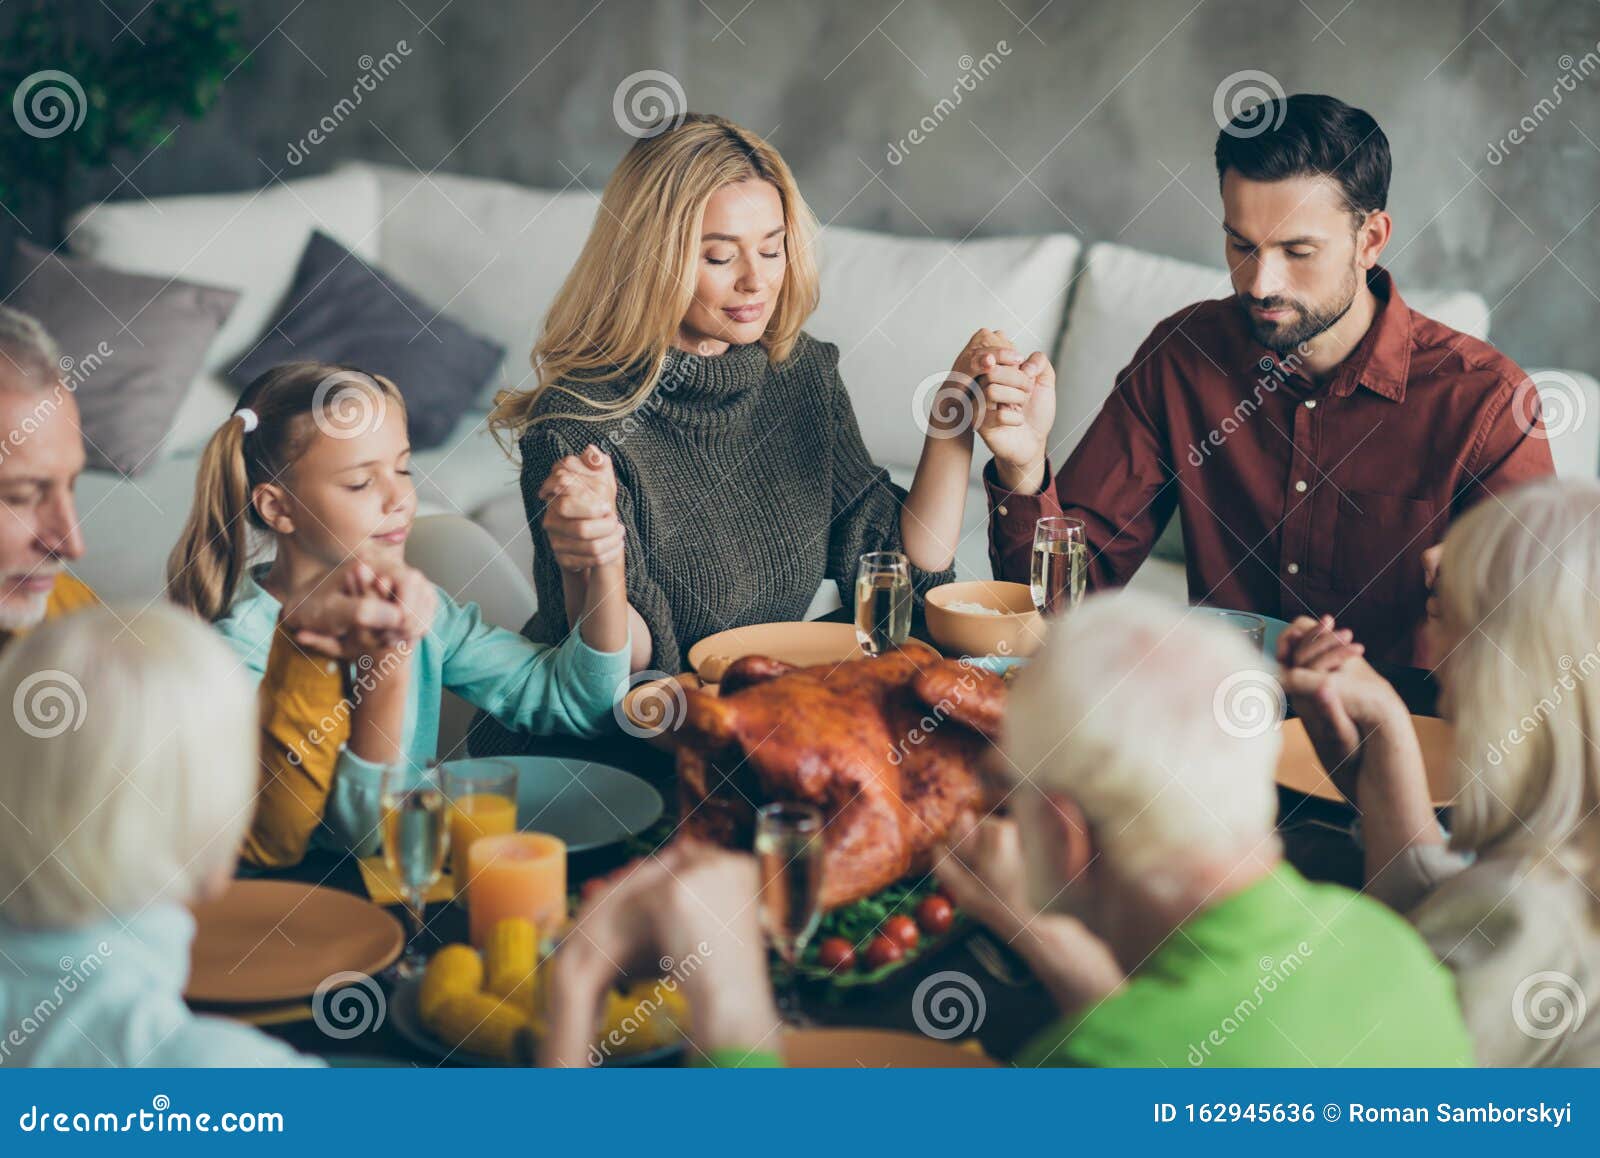 large family gathering on thanksgiving day sit table enjoy october meal hold hands pray meeting mature relatives small